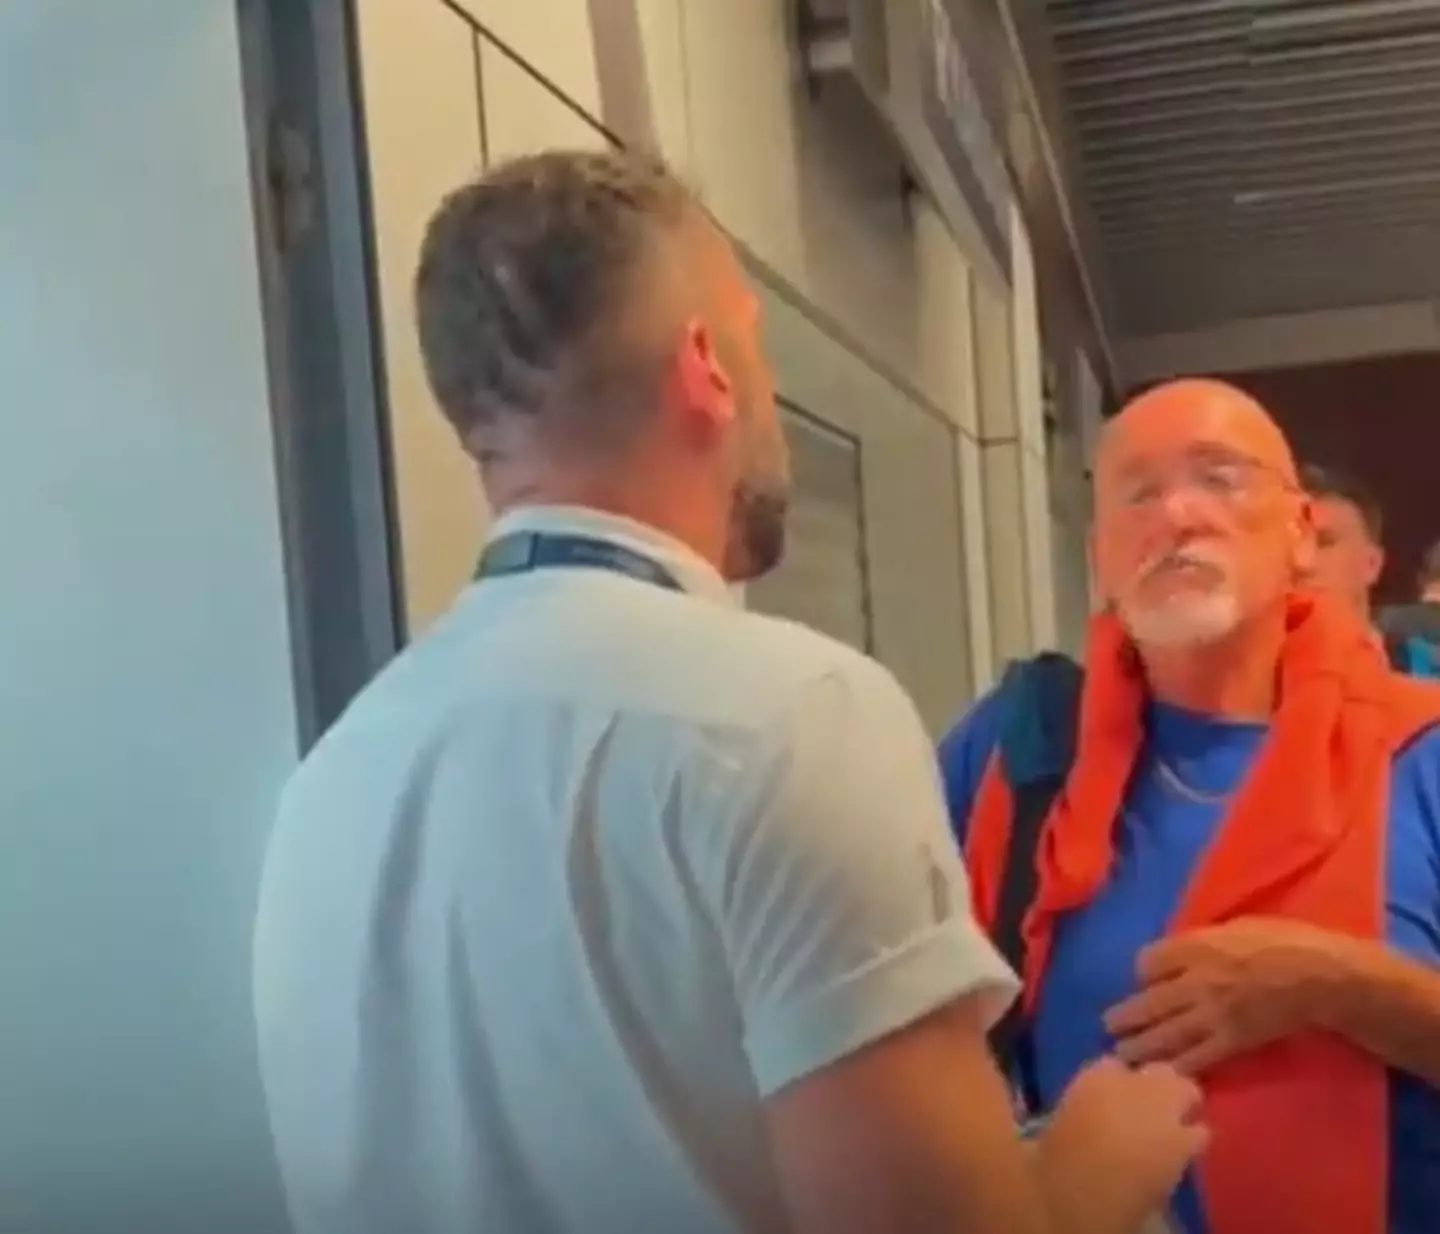 Ryanair passengers were seen arguing with airport staff as they tried to get home.